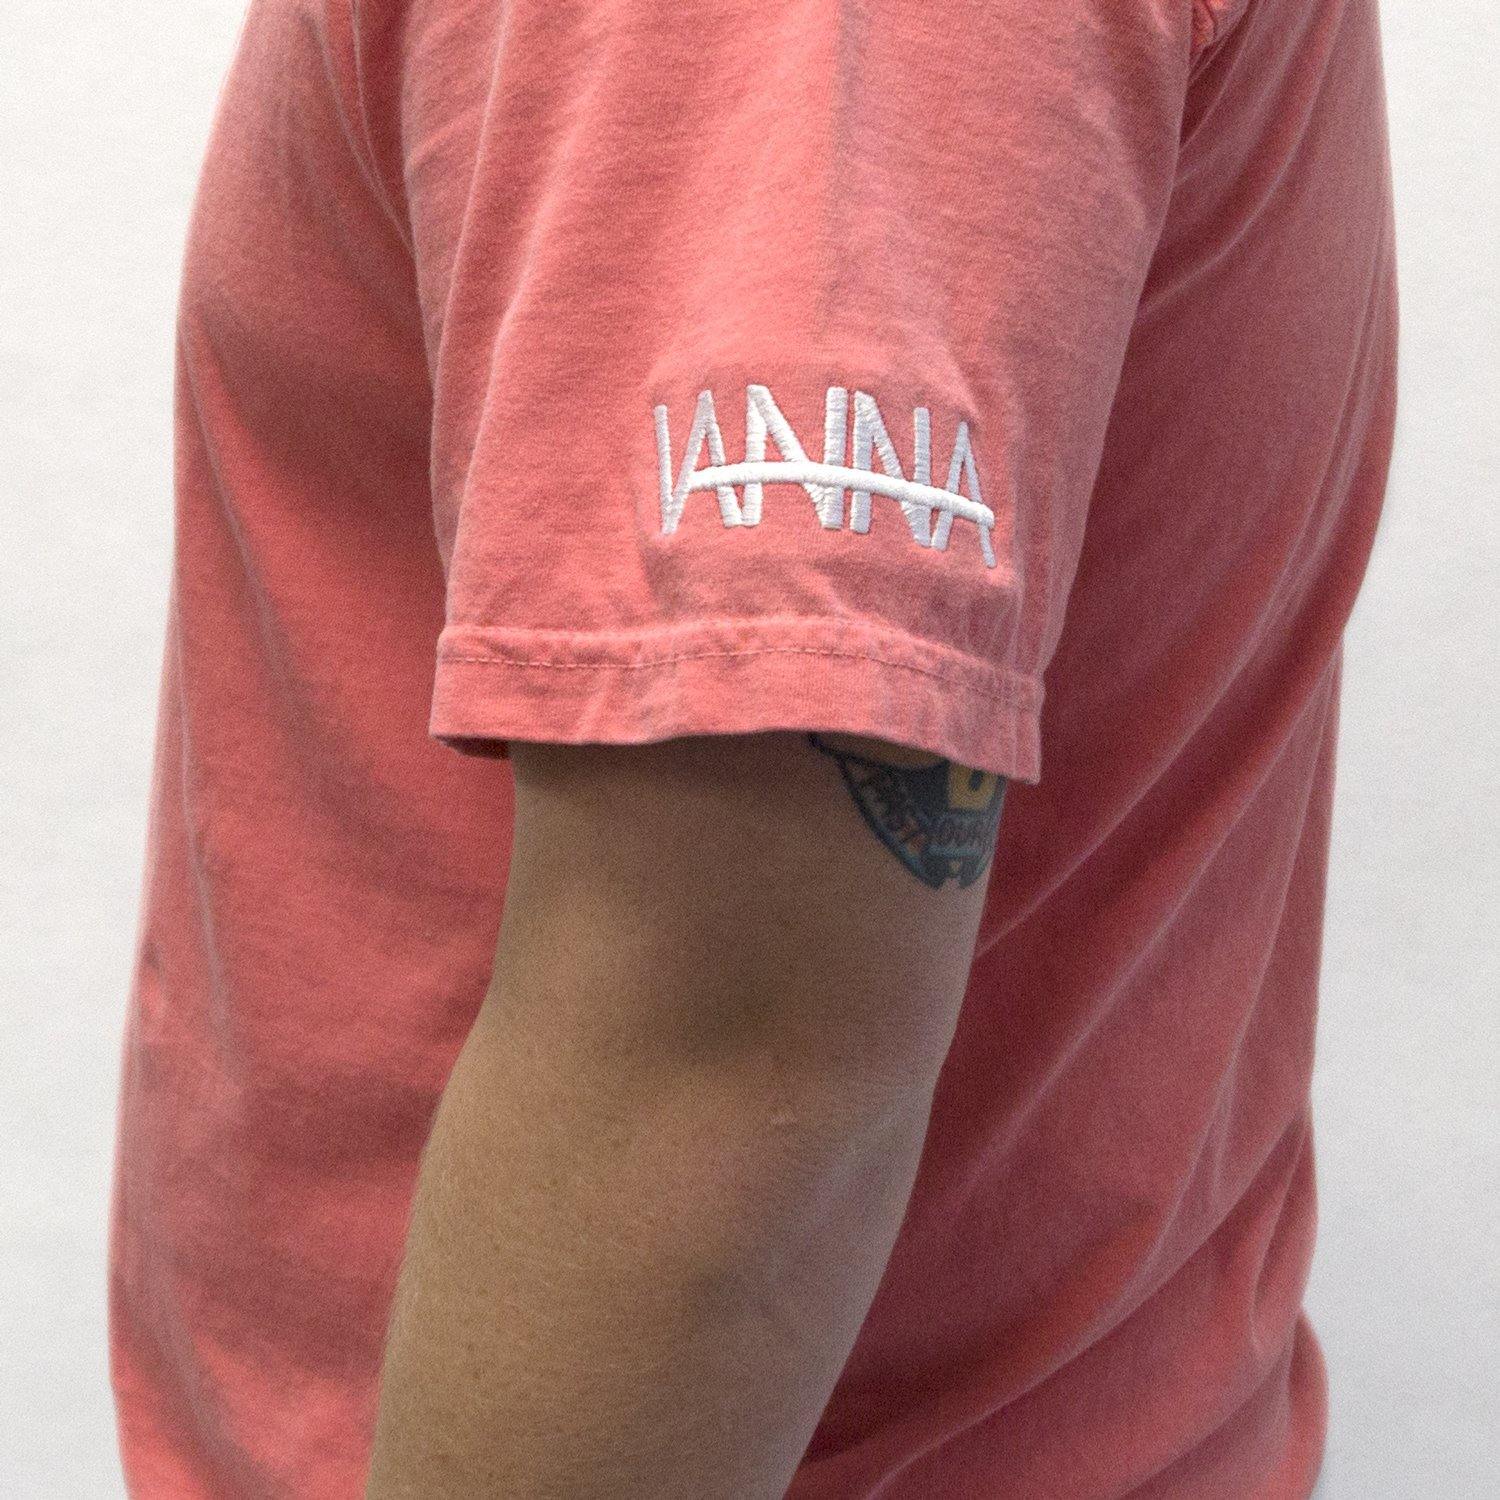 Buy – Vanna "All Hell" Embroidered Shirt – Band & Music Merch – Cold Cuts Merch